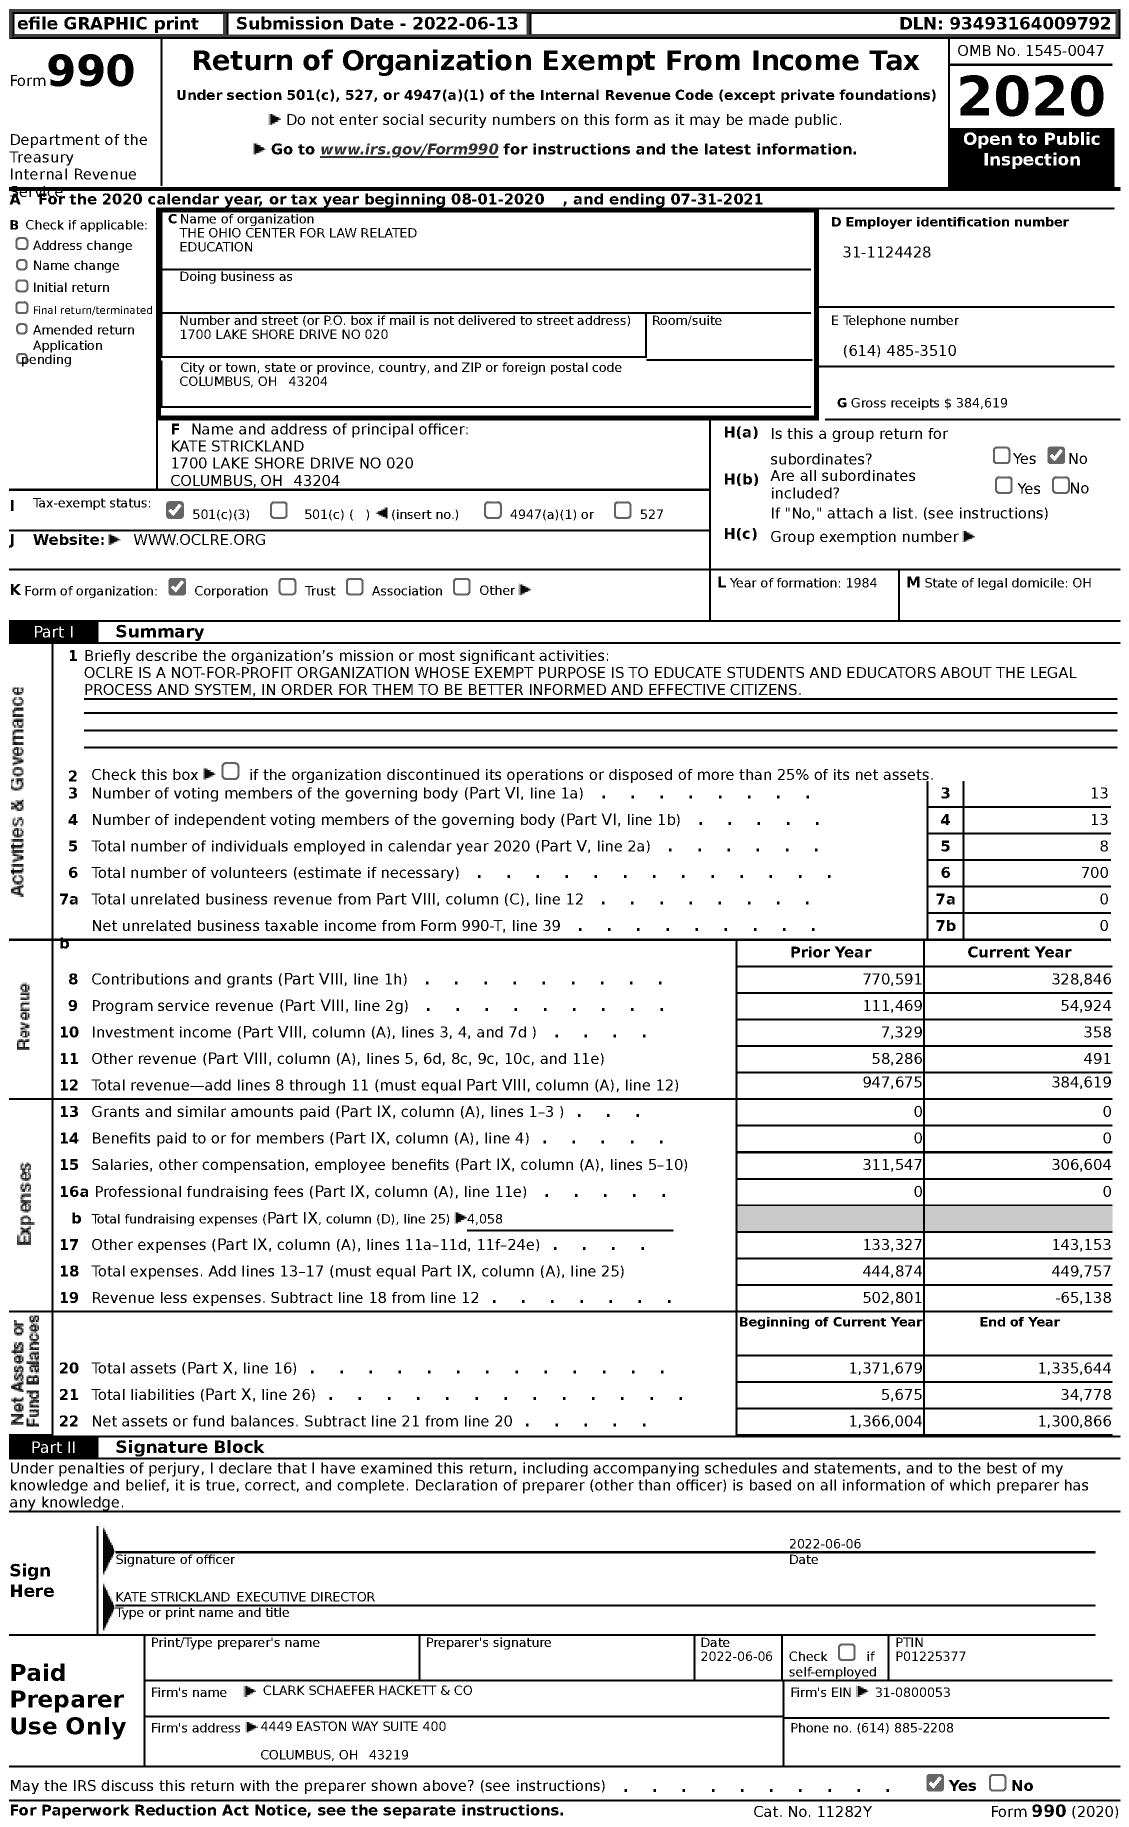 Image of first page of 2020 Form 990 for The Ohio Center for Law Related Education